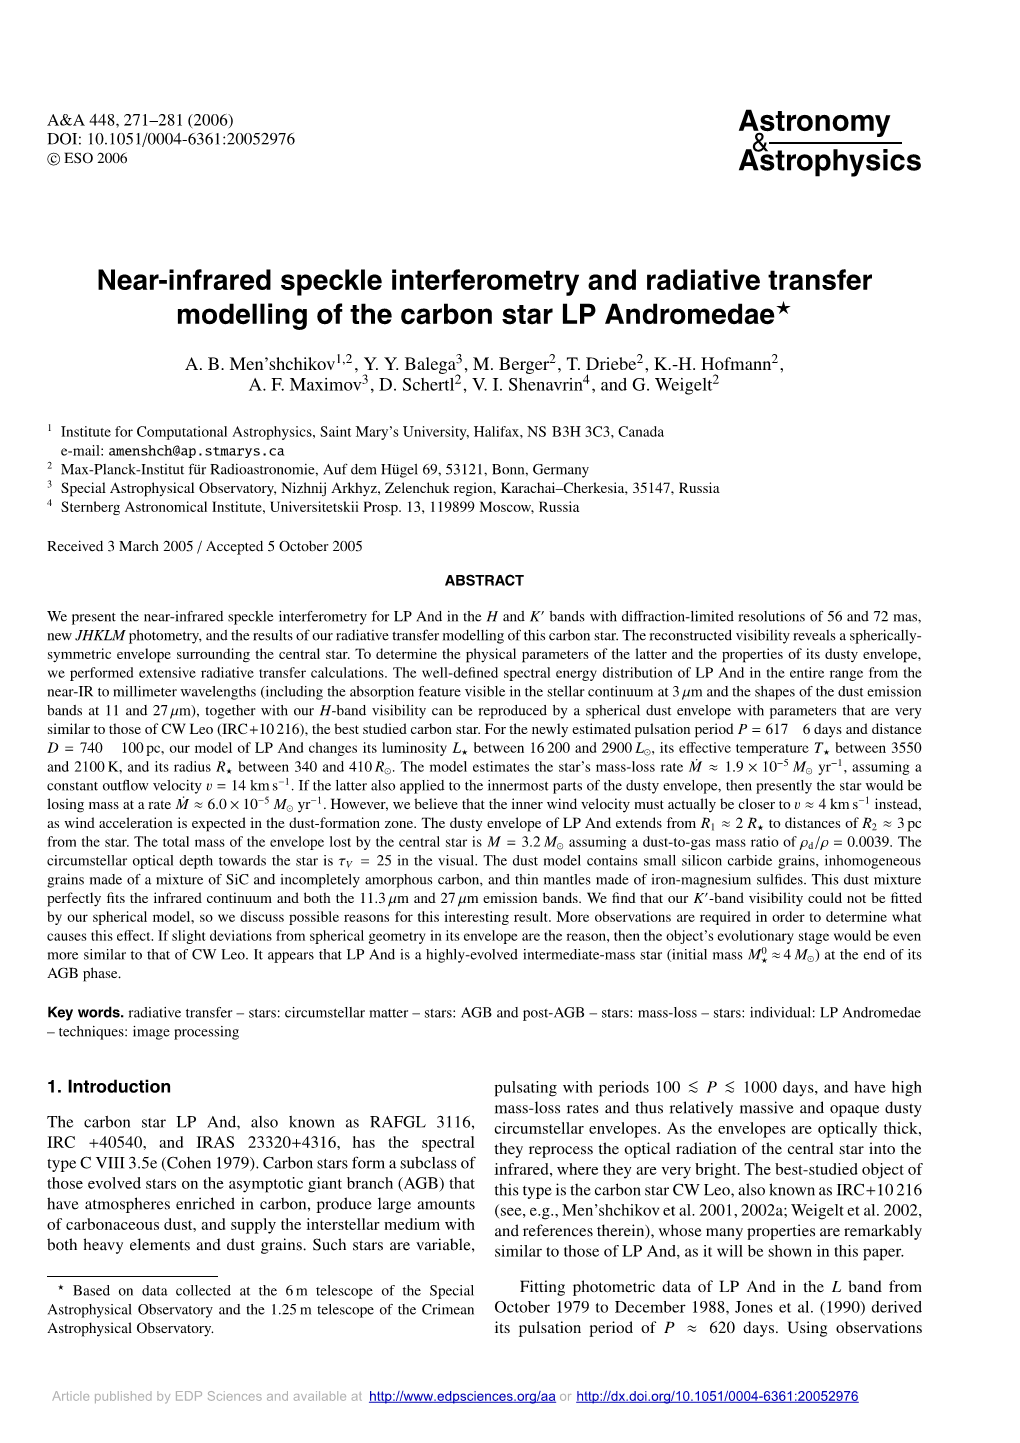 Near-Infrared Speckle Interferometry and Radiative Transfer Modelling of the Carbon Star LP Andromedae